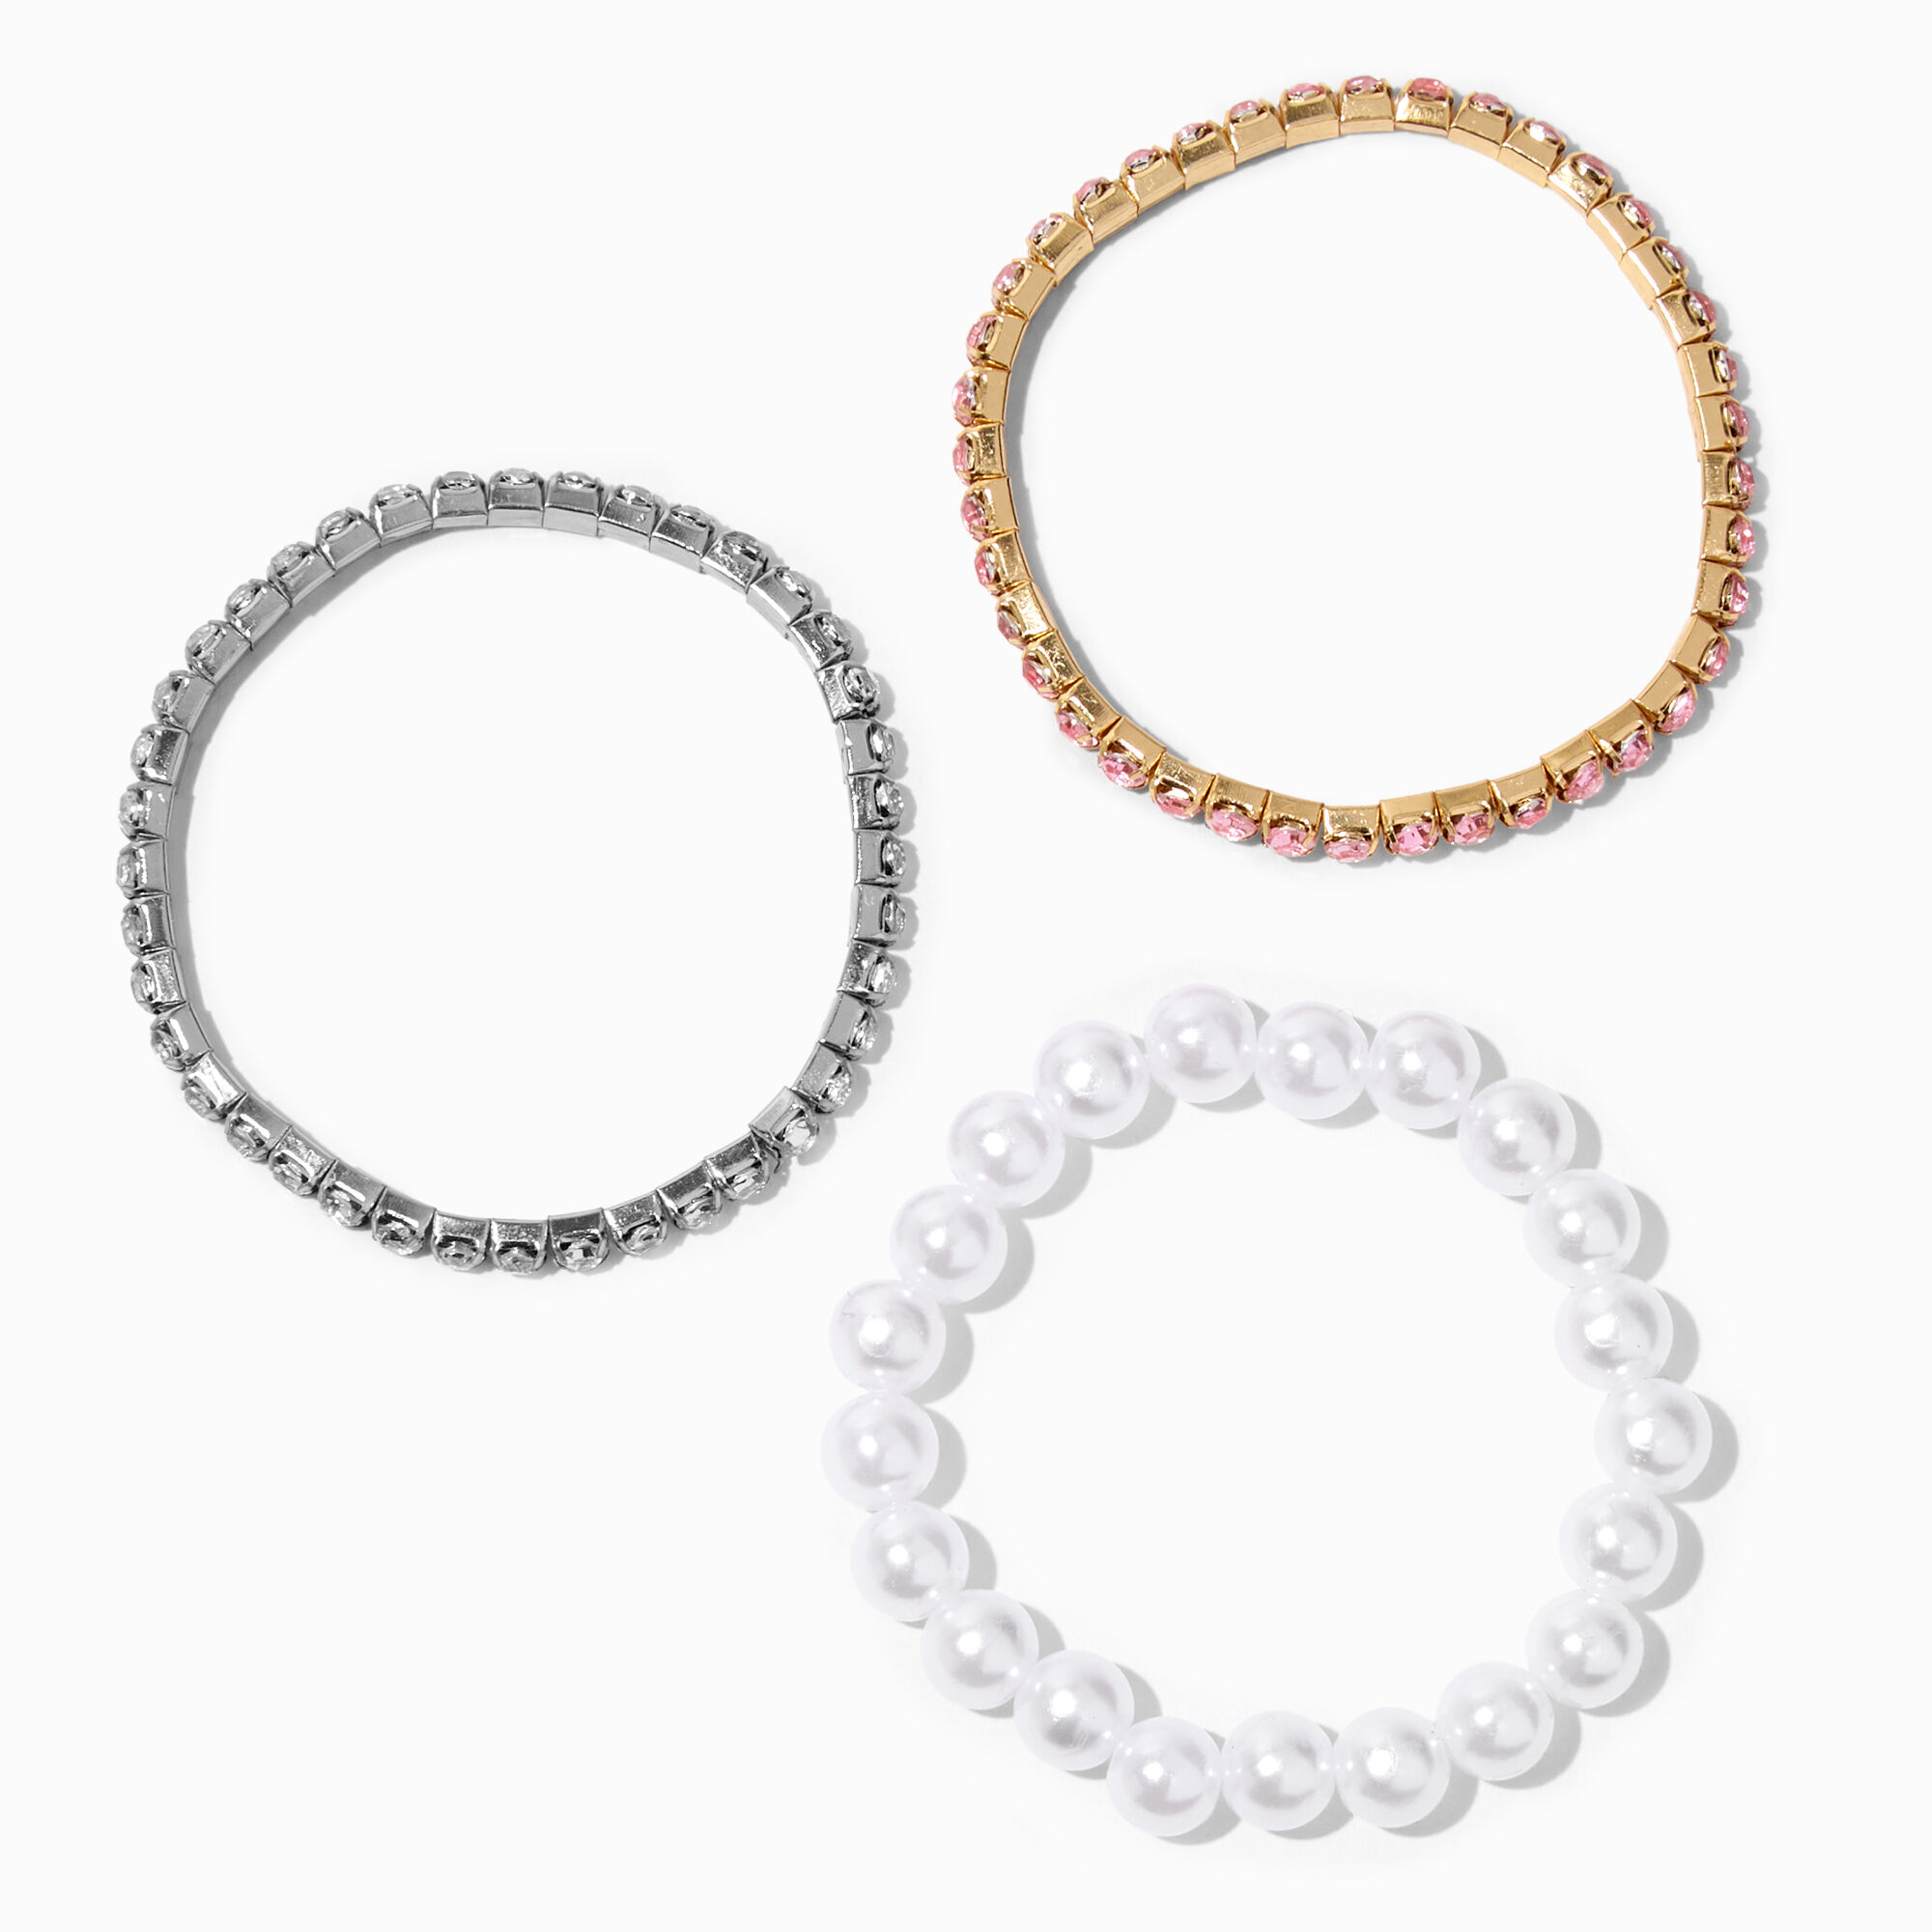 View Claires Club Mixed Metal Pearl Stretch Bracelets 3 Pack Gold information